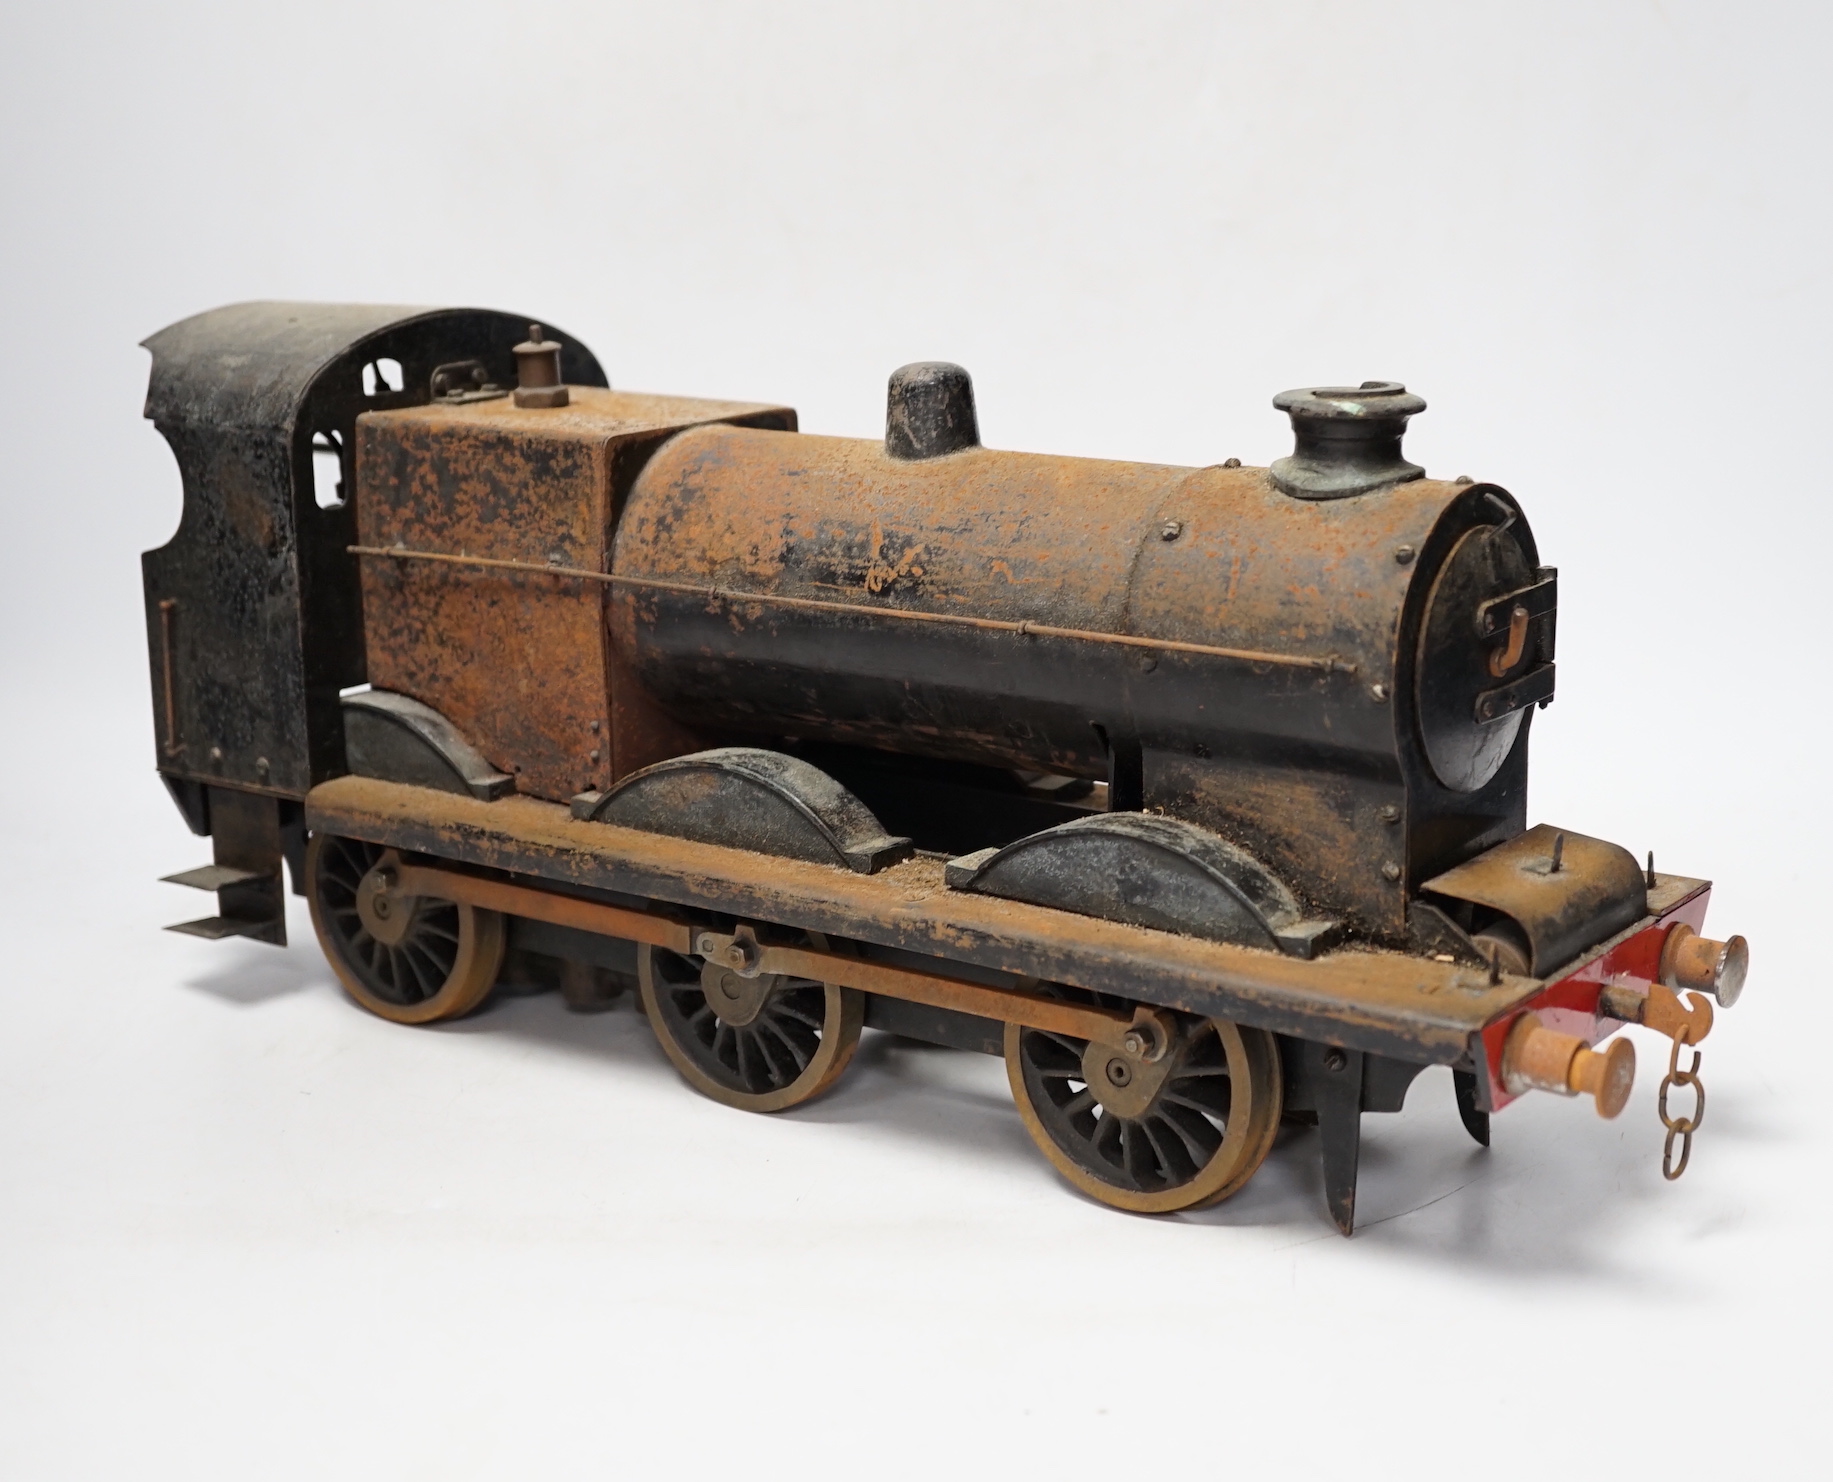 A paraffin/meths fired 2.5 inch live steam BR class 4F 0-6-0 tender locomotive, single inside cylinder, six wick burner, safety valve and whistle under running board, 72cm long over the buffers